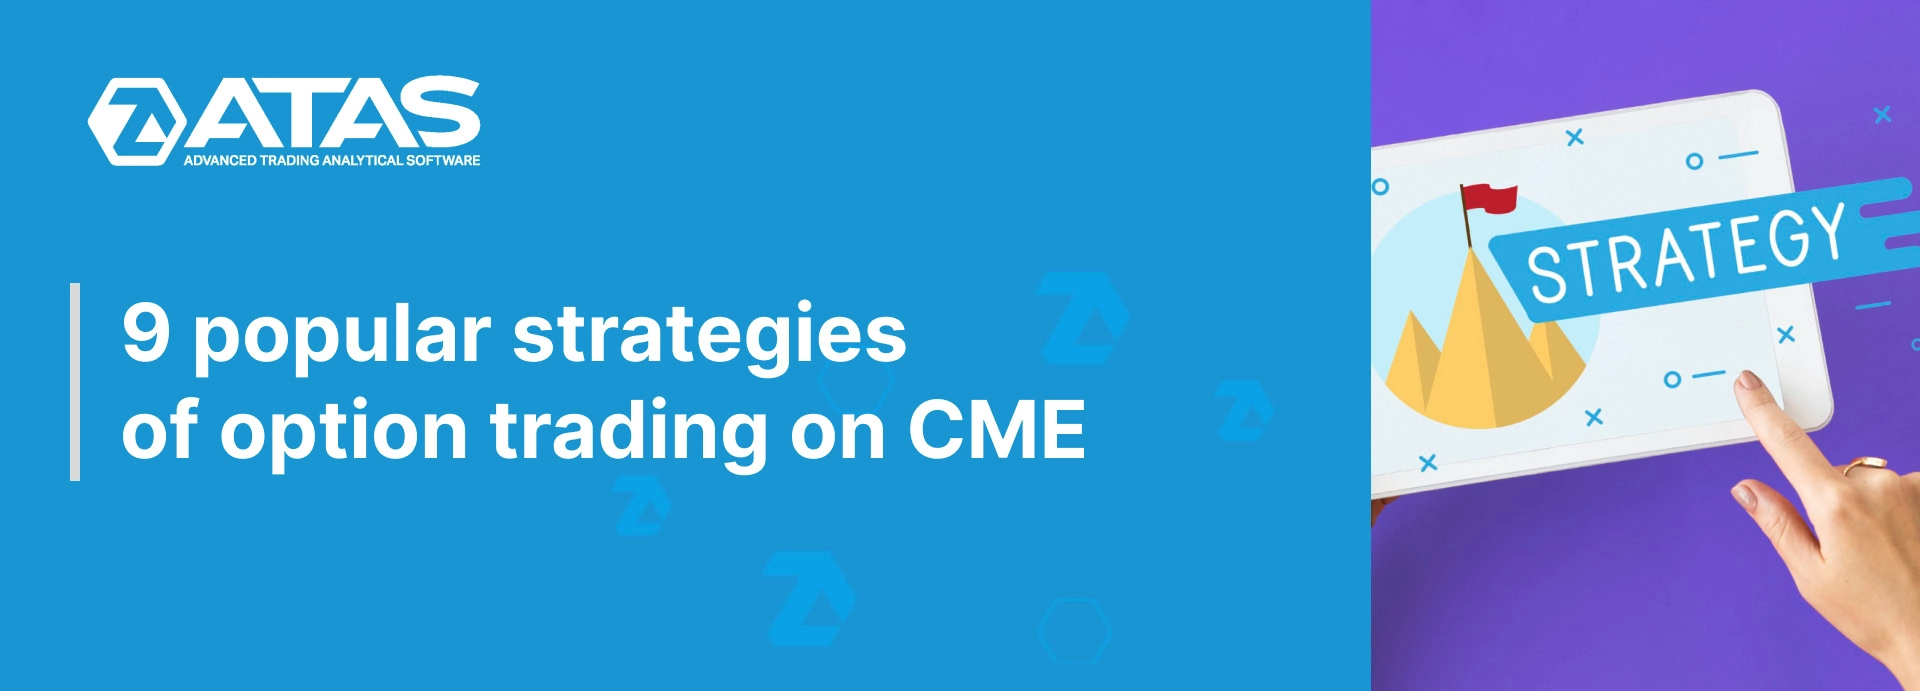 9 popular strategies of option trading on CME